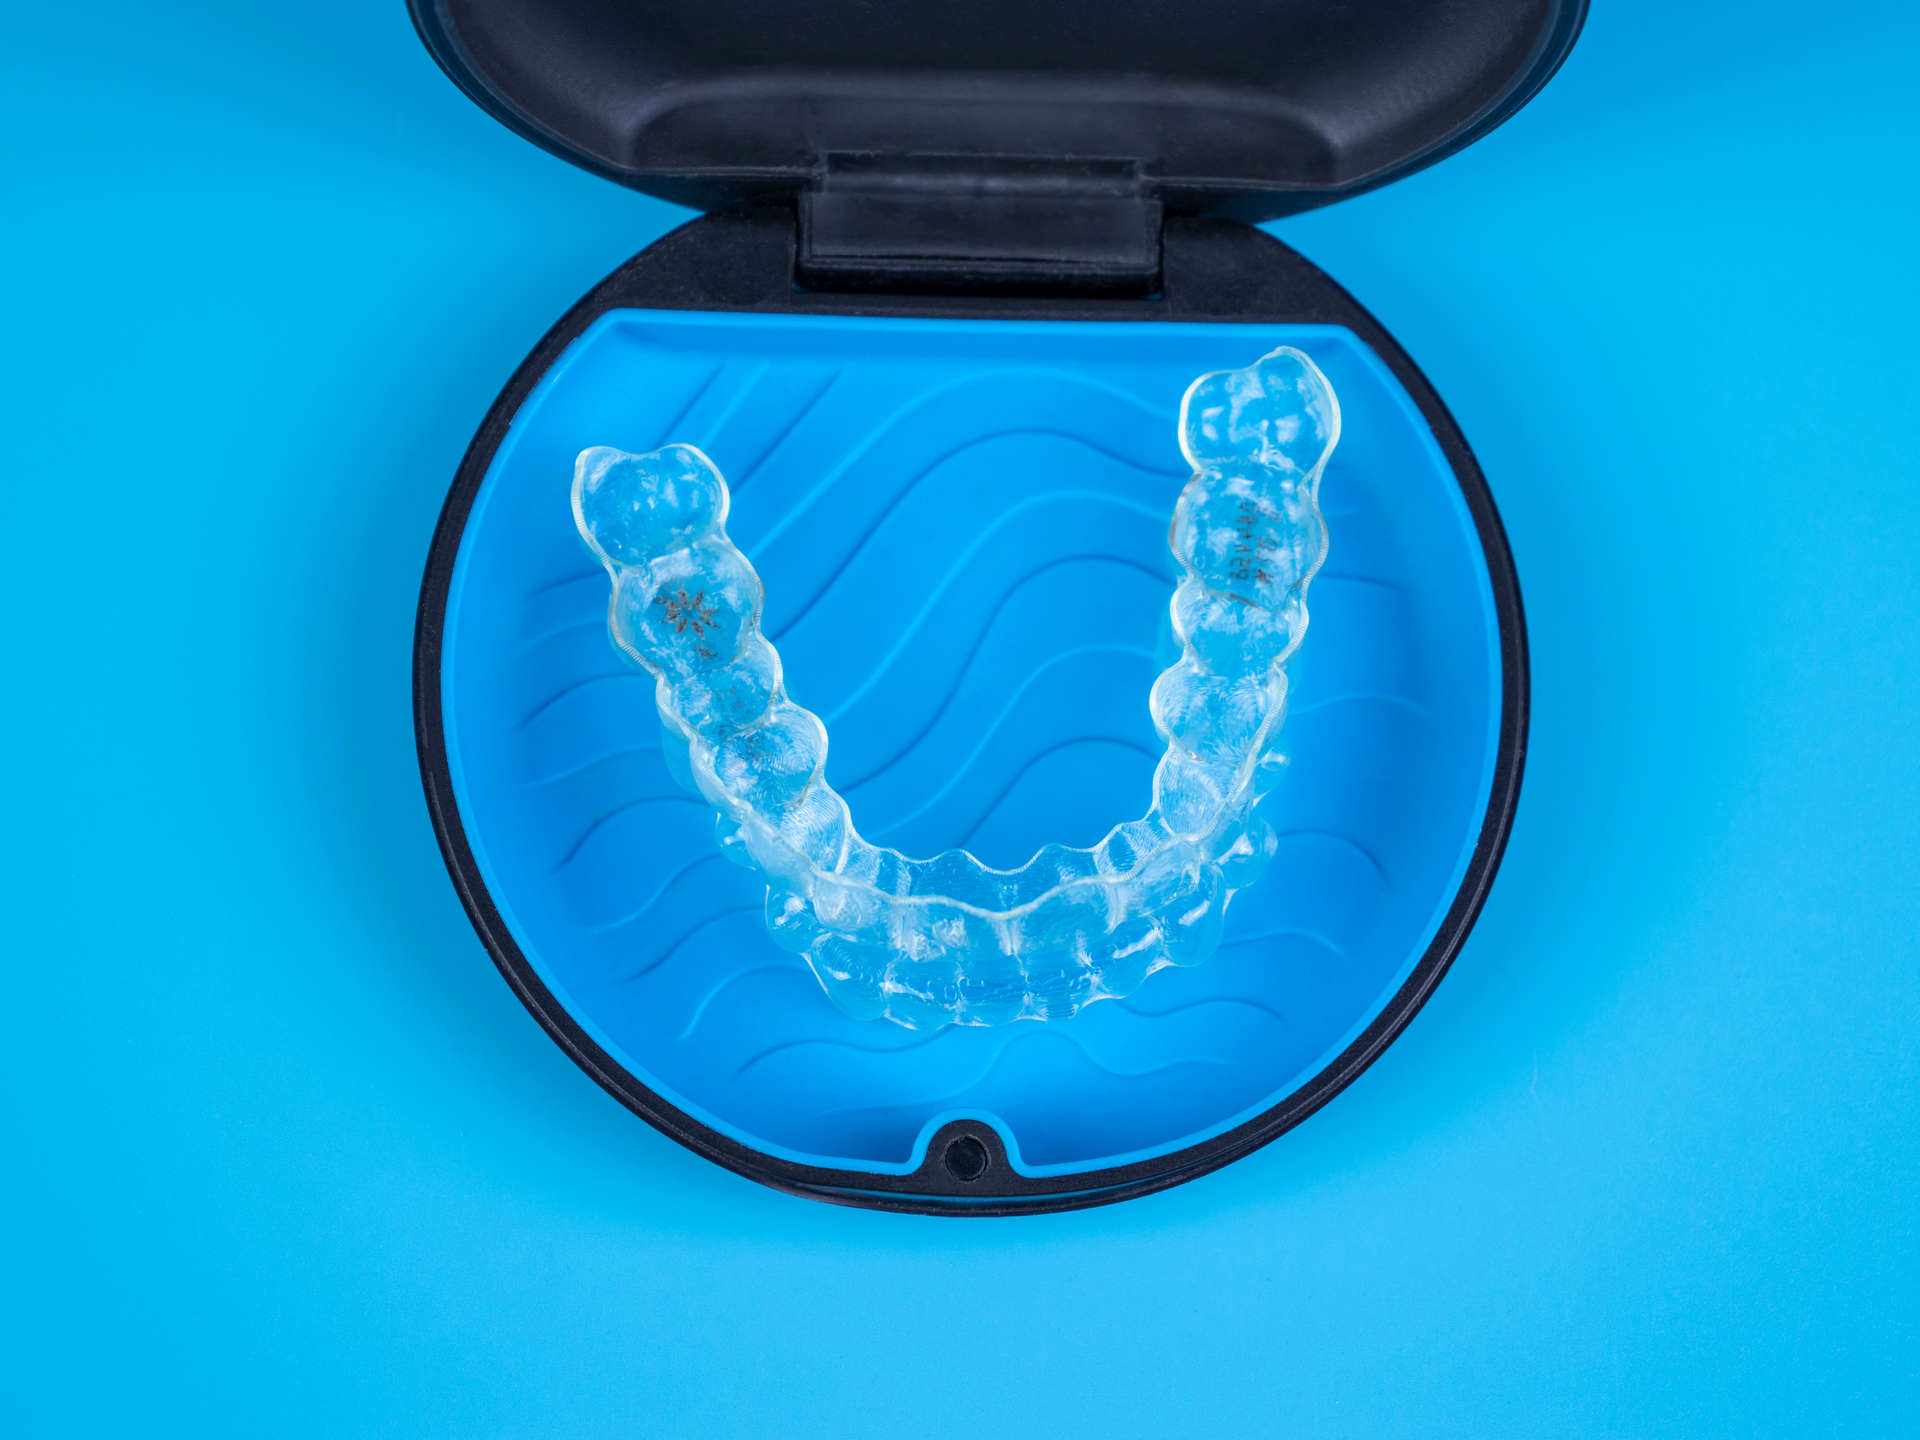 a pair of clear braces in a case on a blue surface .